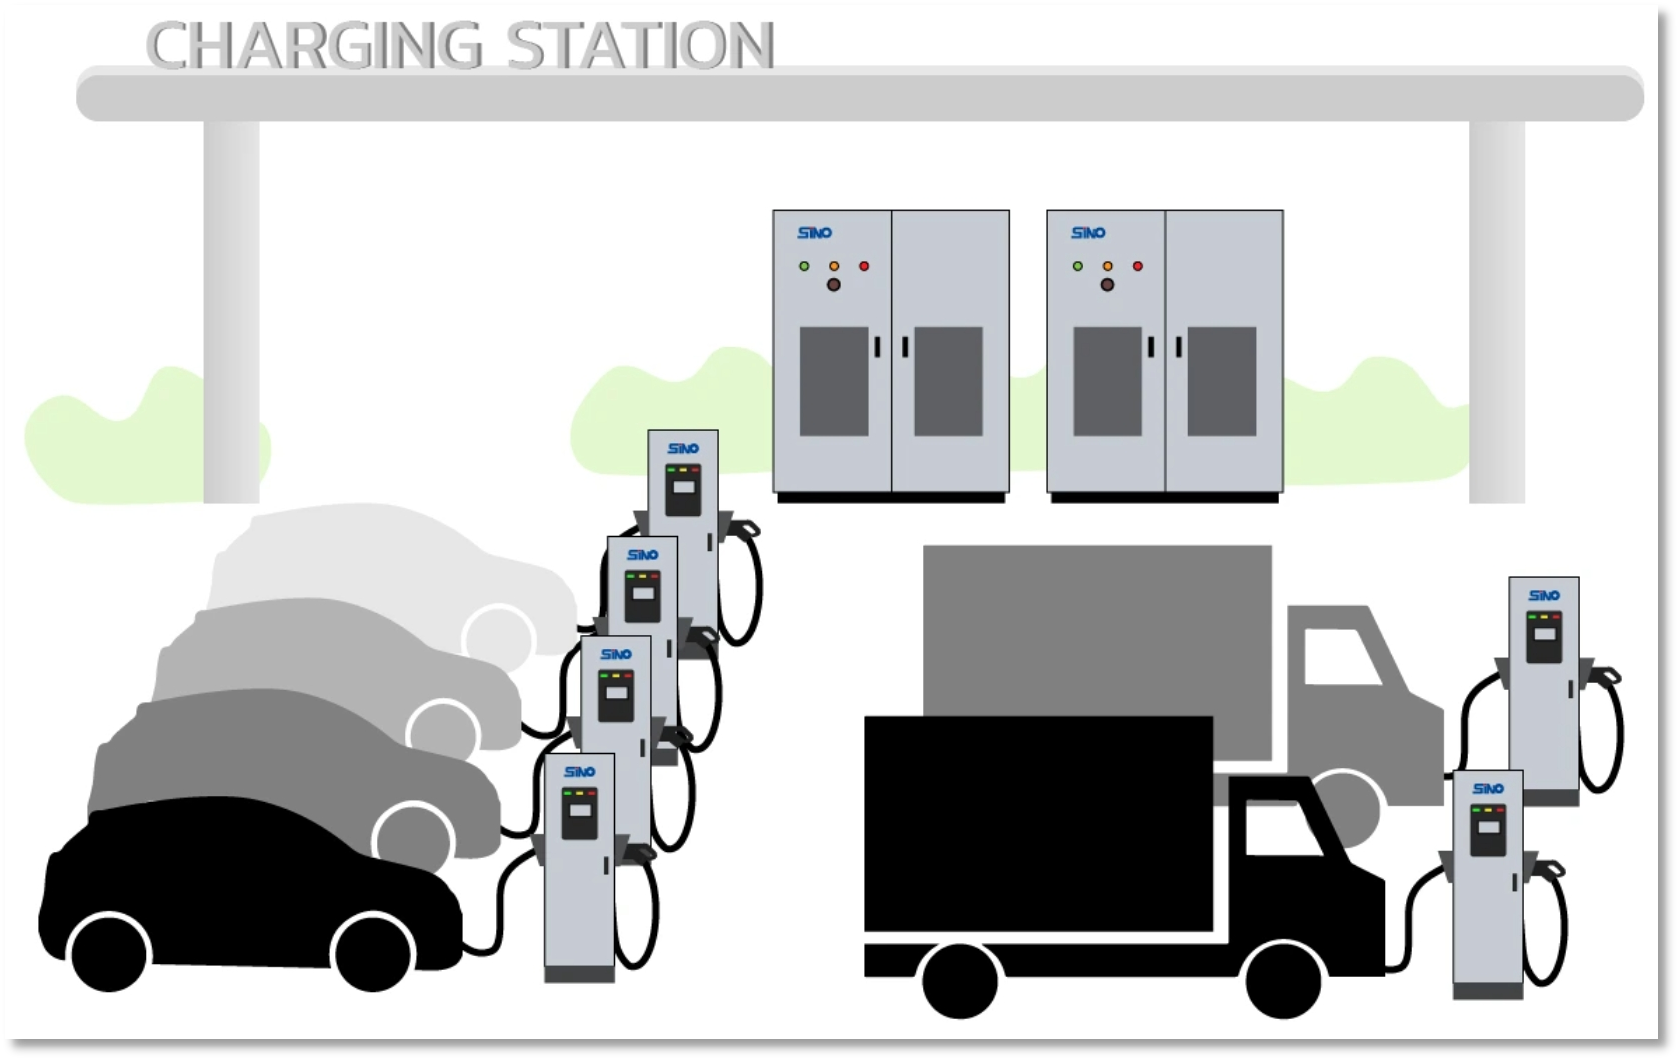 Illustration of a charging station with multiple electric vehicles and trucks connected to high-power DC chargers.